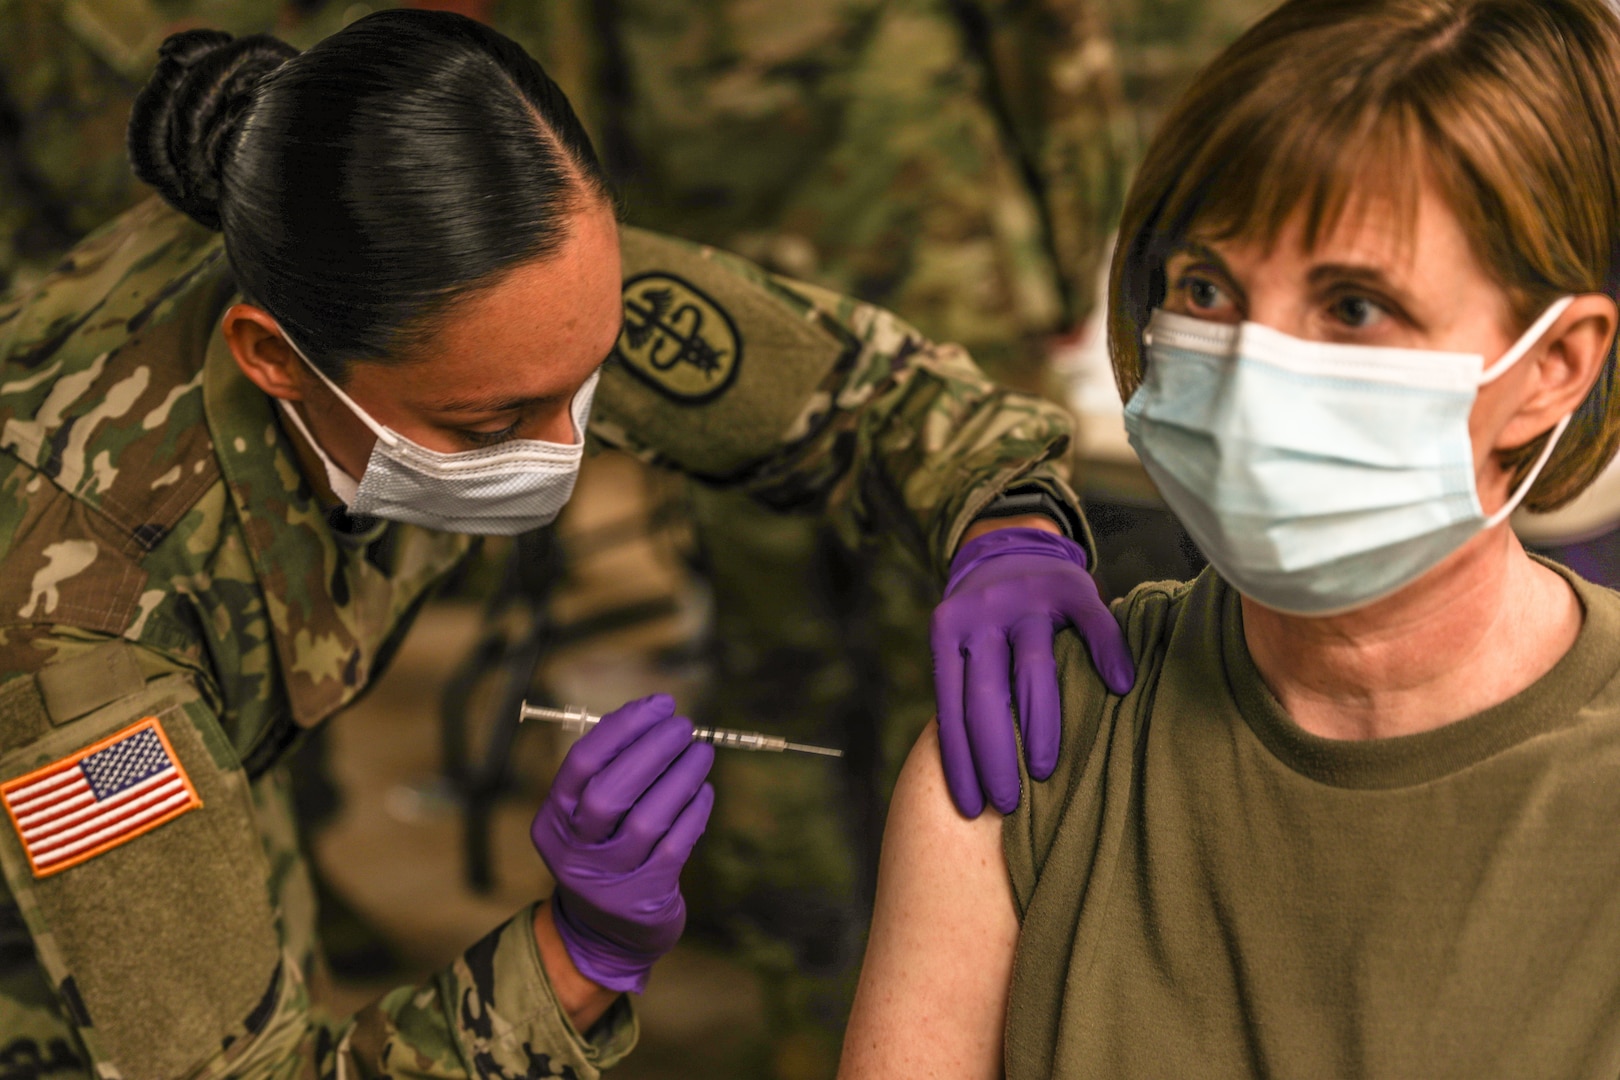 Staff Sgt. Brenda Collins (left), medical specialist from Carl R. Darnall Army Medical Center, administers the COVID-19 vaccination to a patient